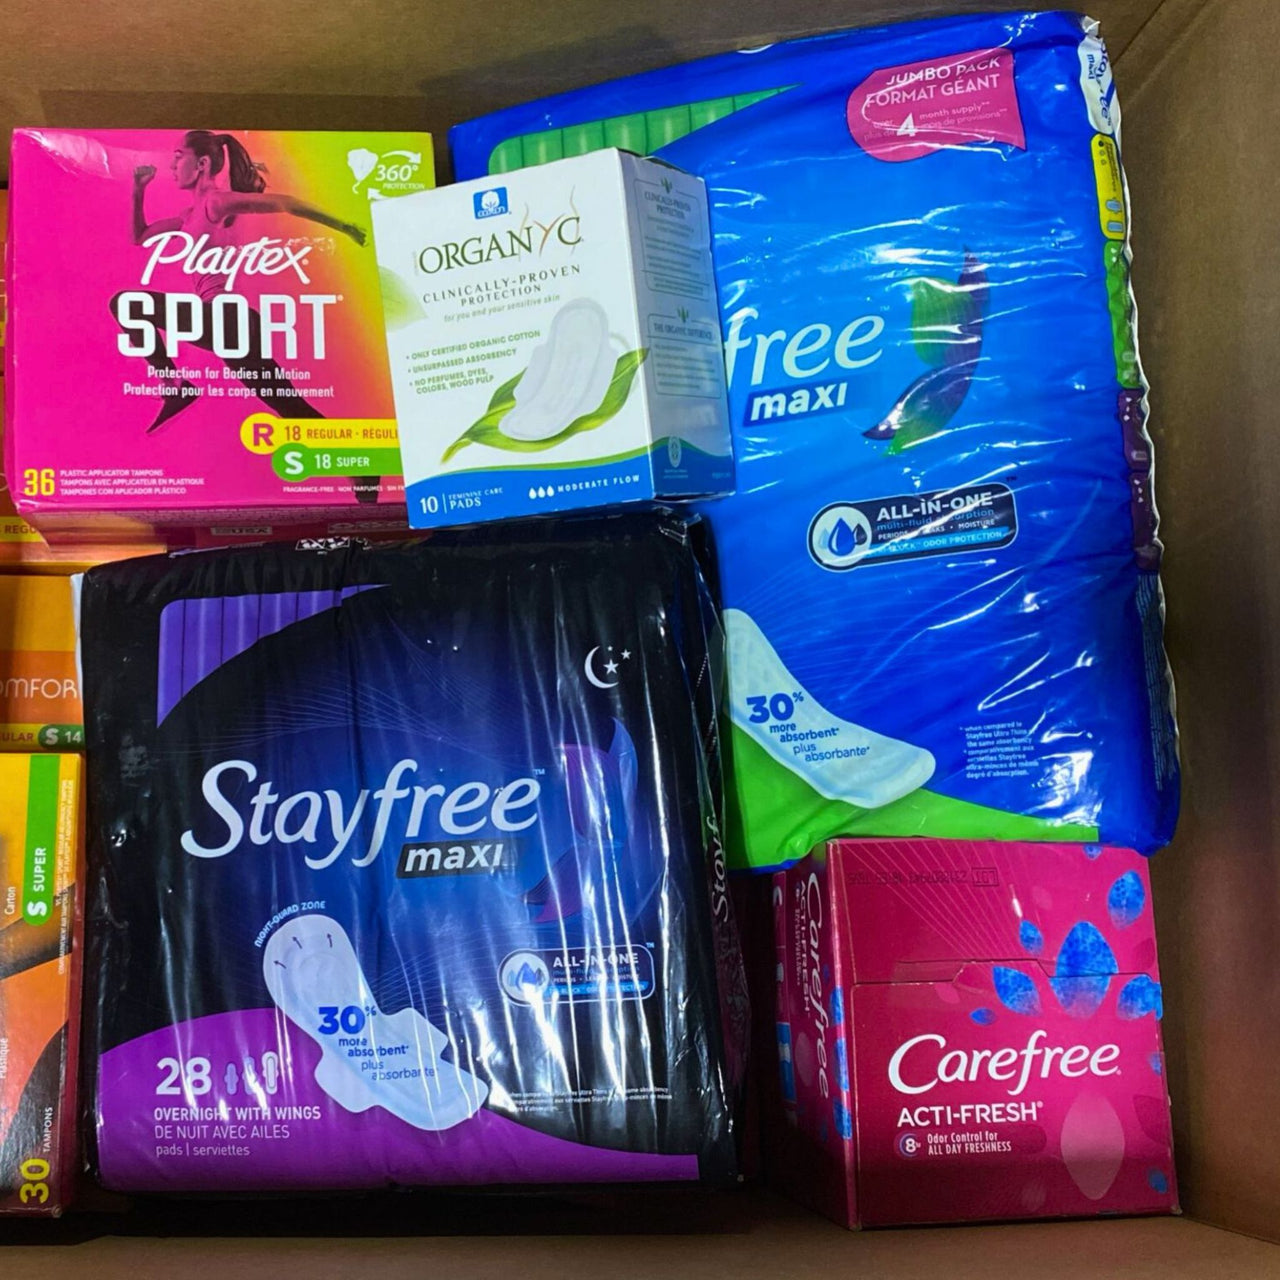 Feminine Care Assorted Mix Includes Tampons & Pads